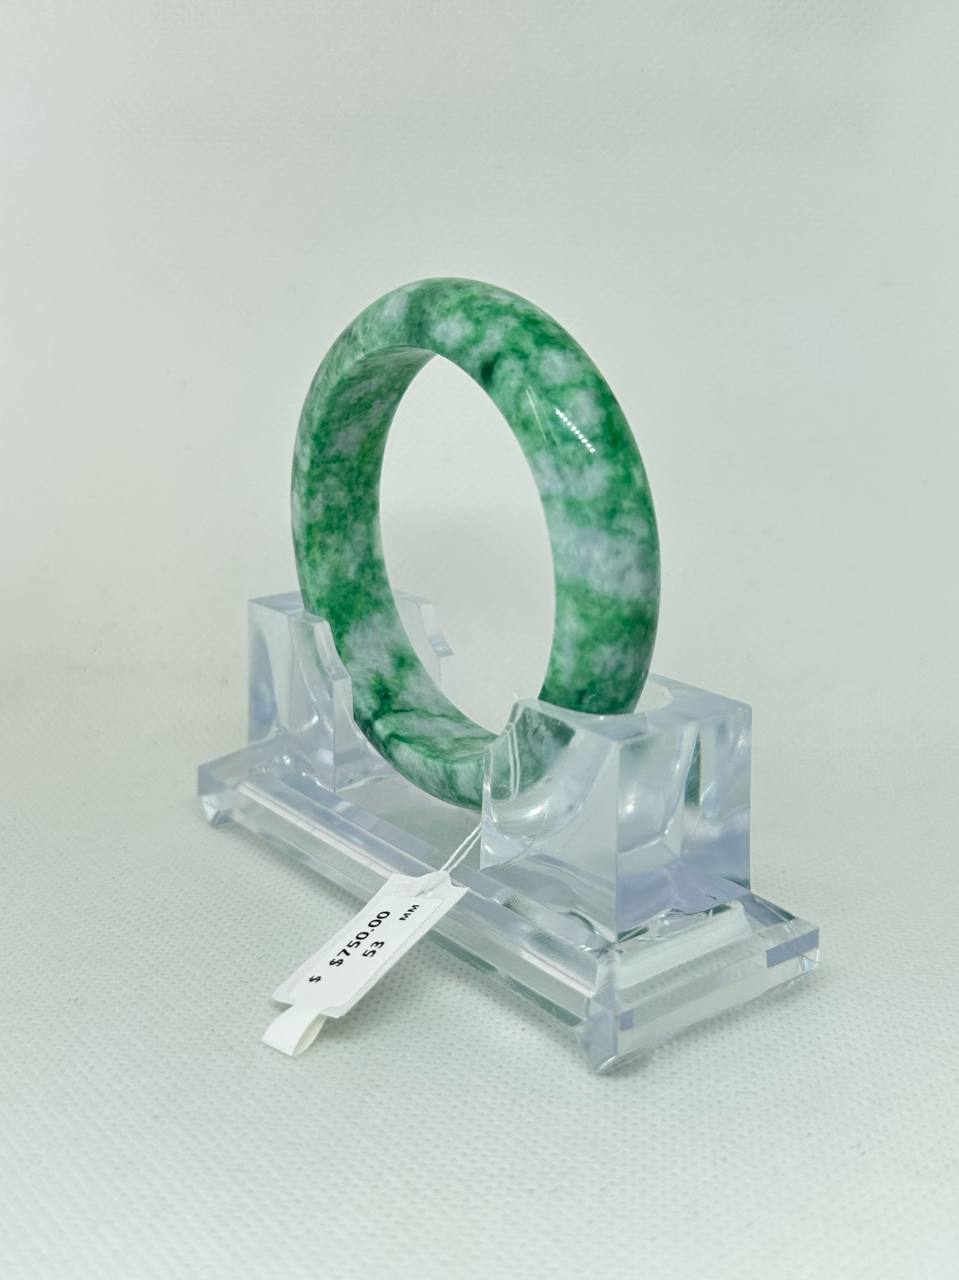 Grade A Natural Jade Bangle with certificate #36933